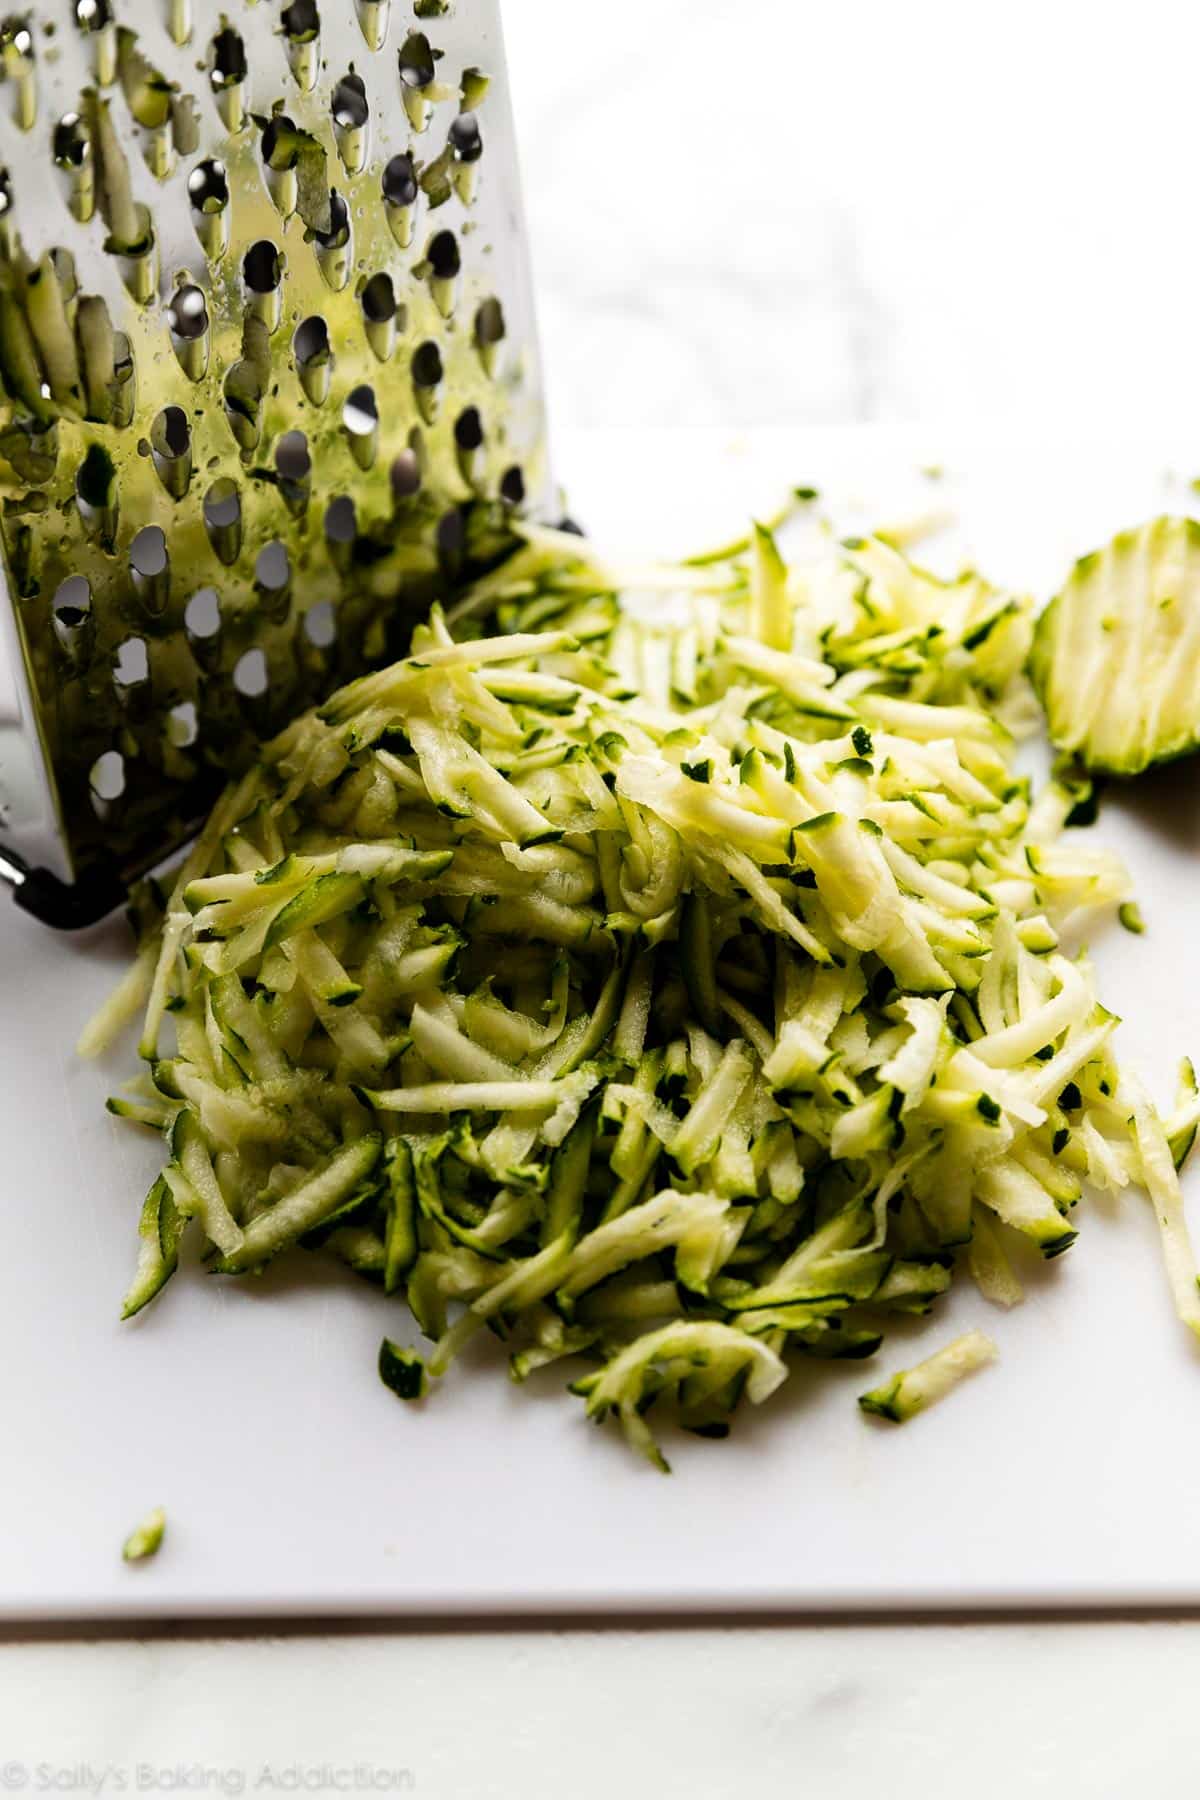 Shredded zucchini with a grater box